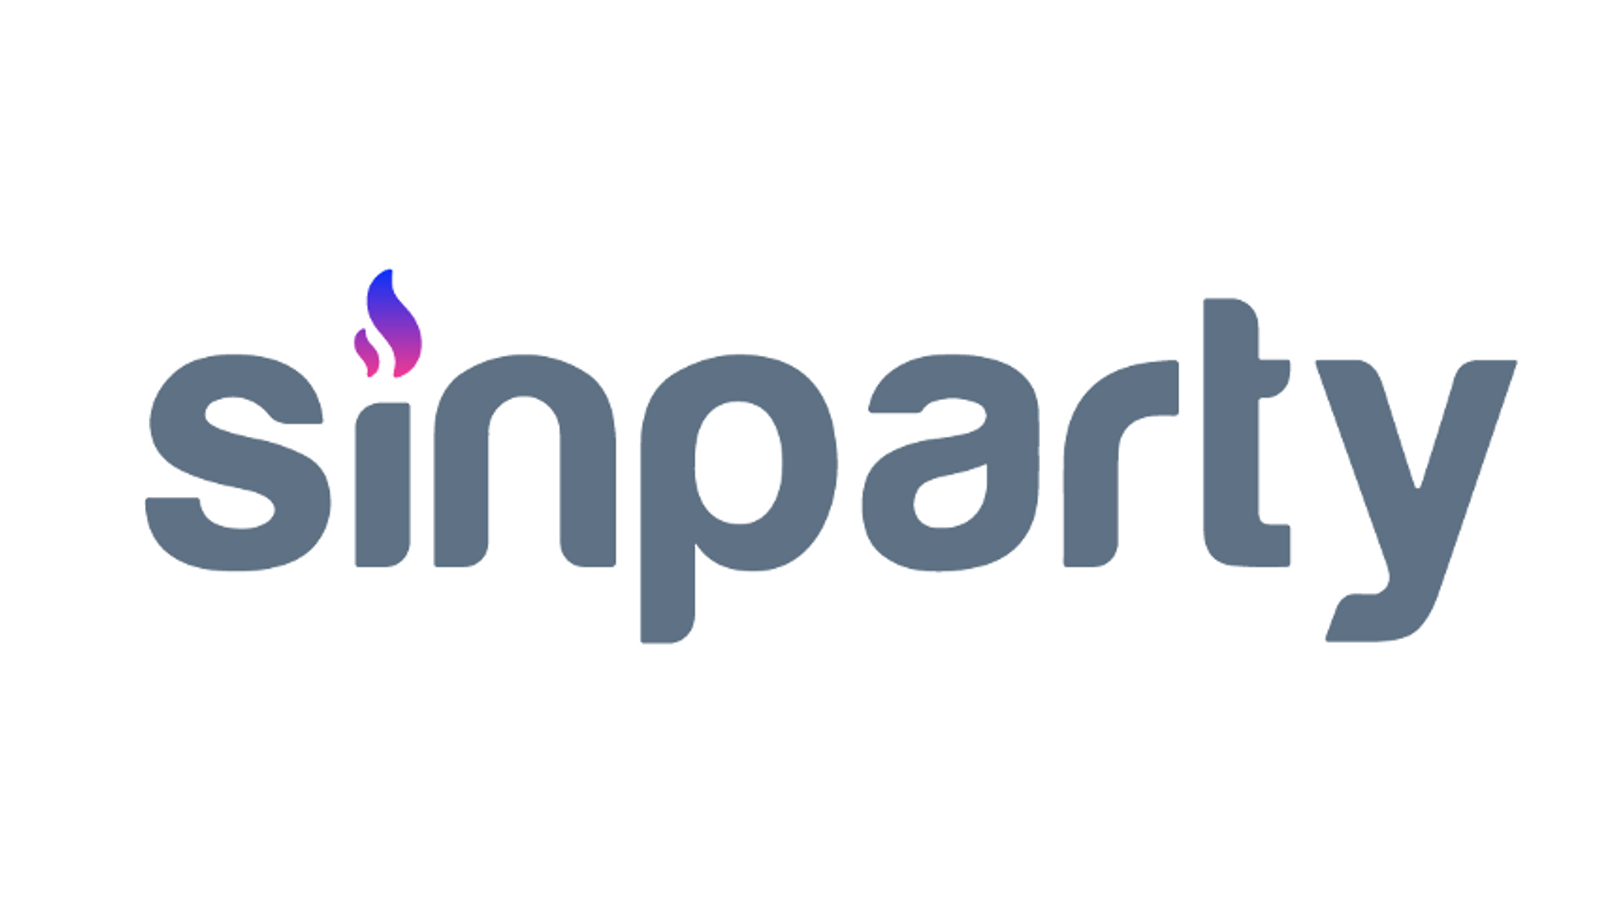 Sinparty.com Offers Performer Financial Stimulus Opportunity